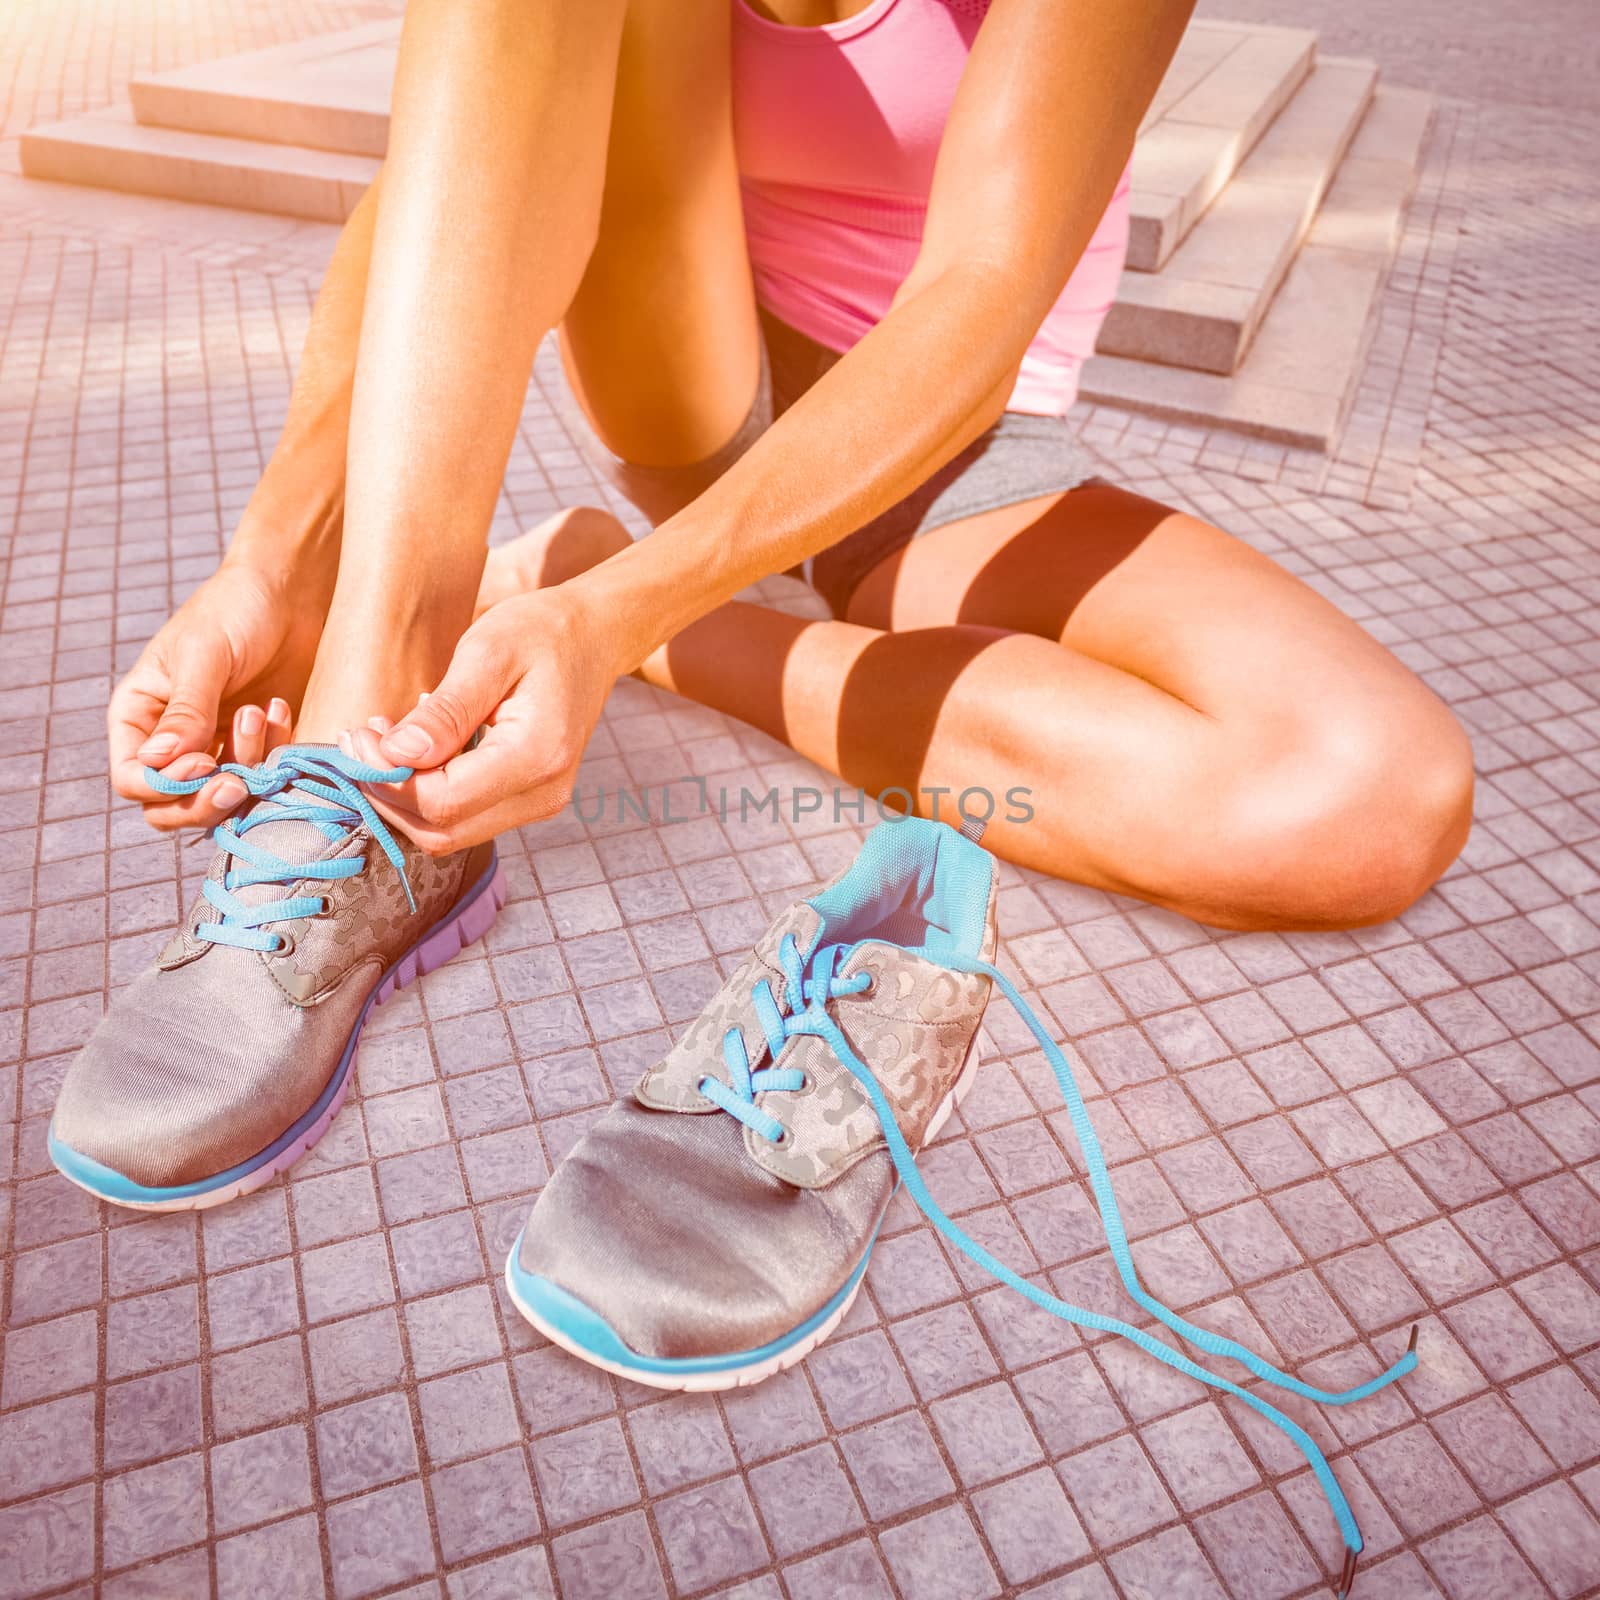 Composite image of athletic woman lacing up shoes